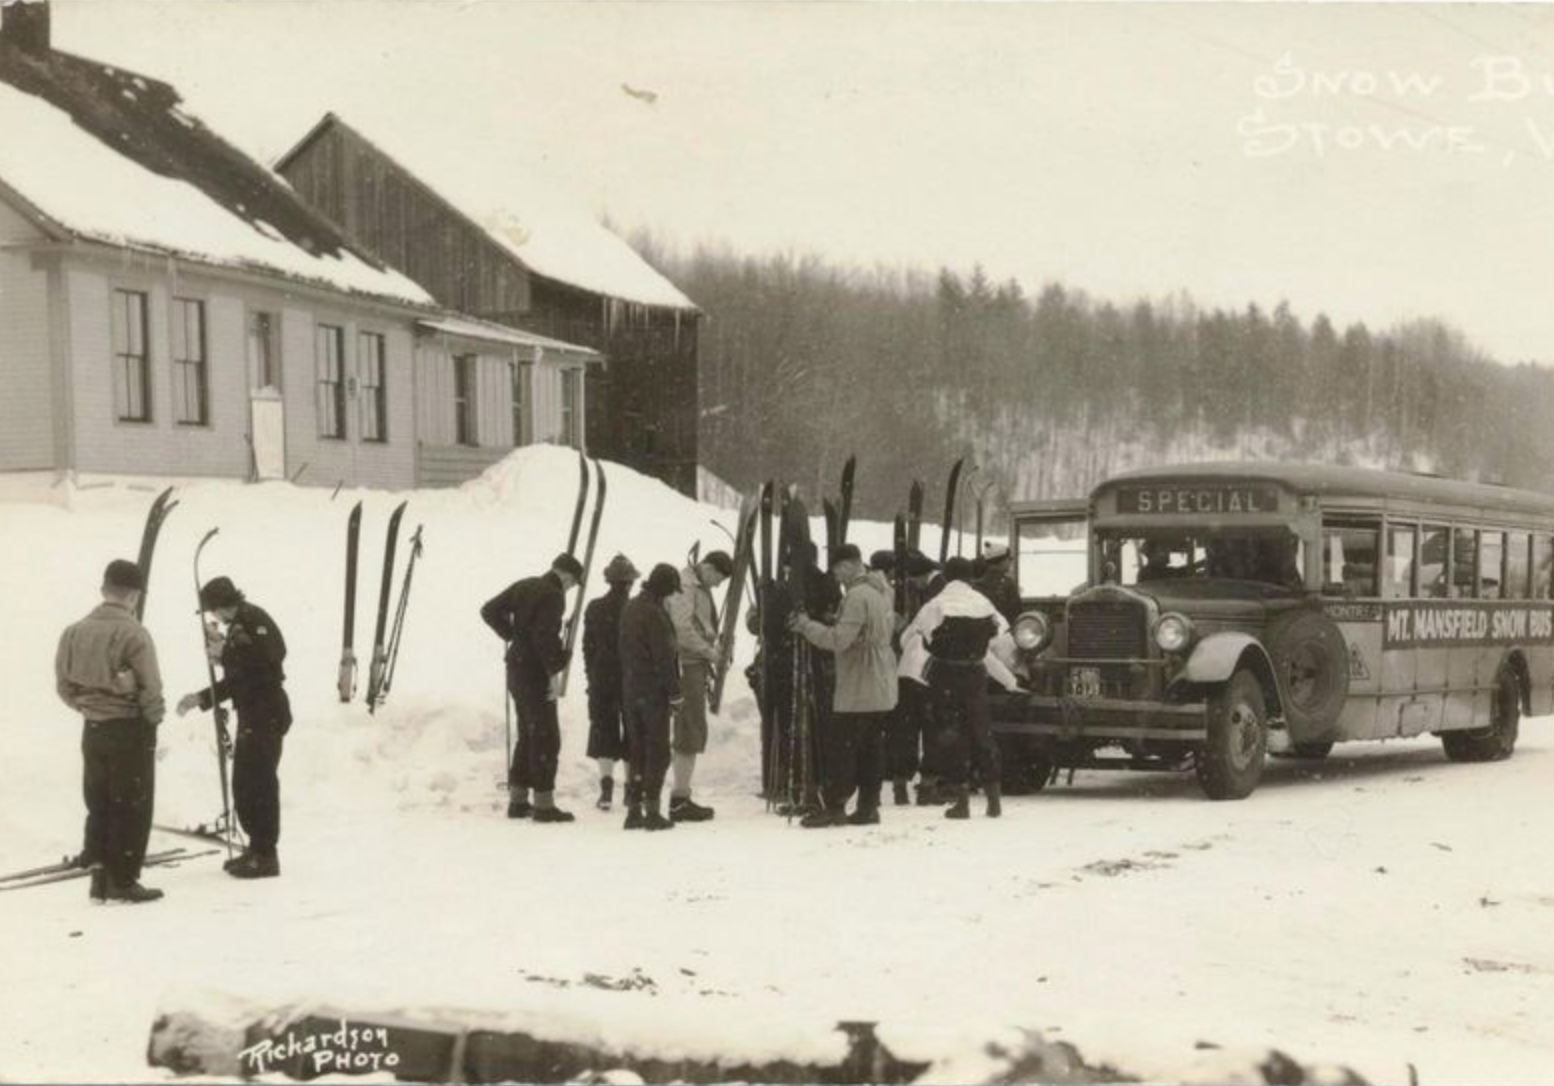 A black-and-white photo of people getting off a bus with skis.